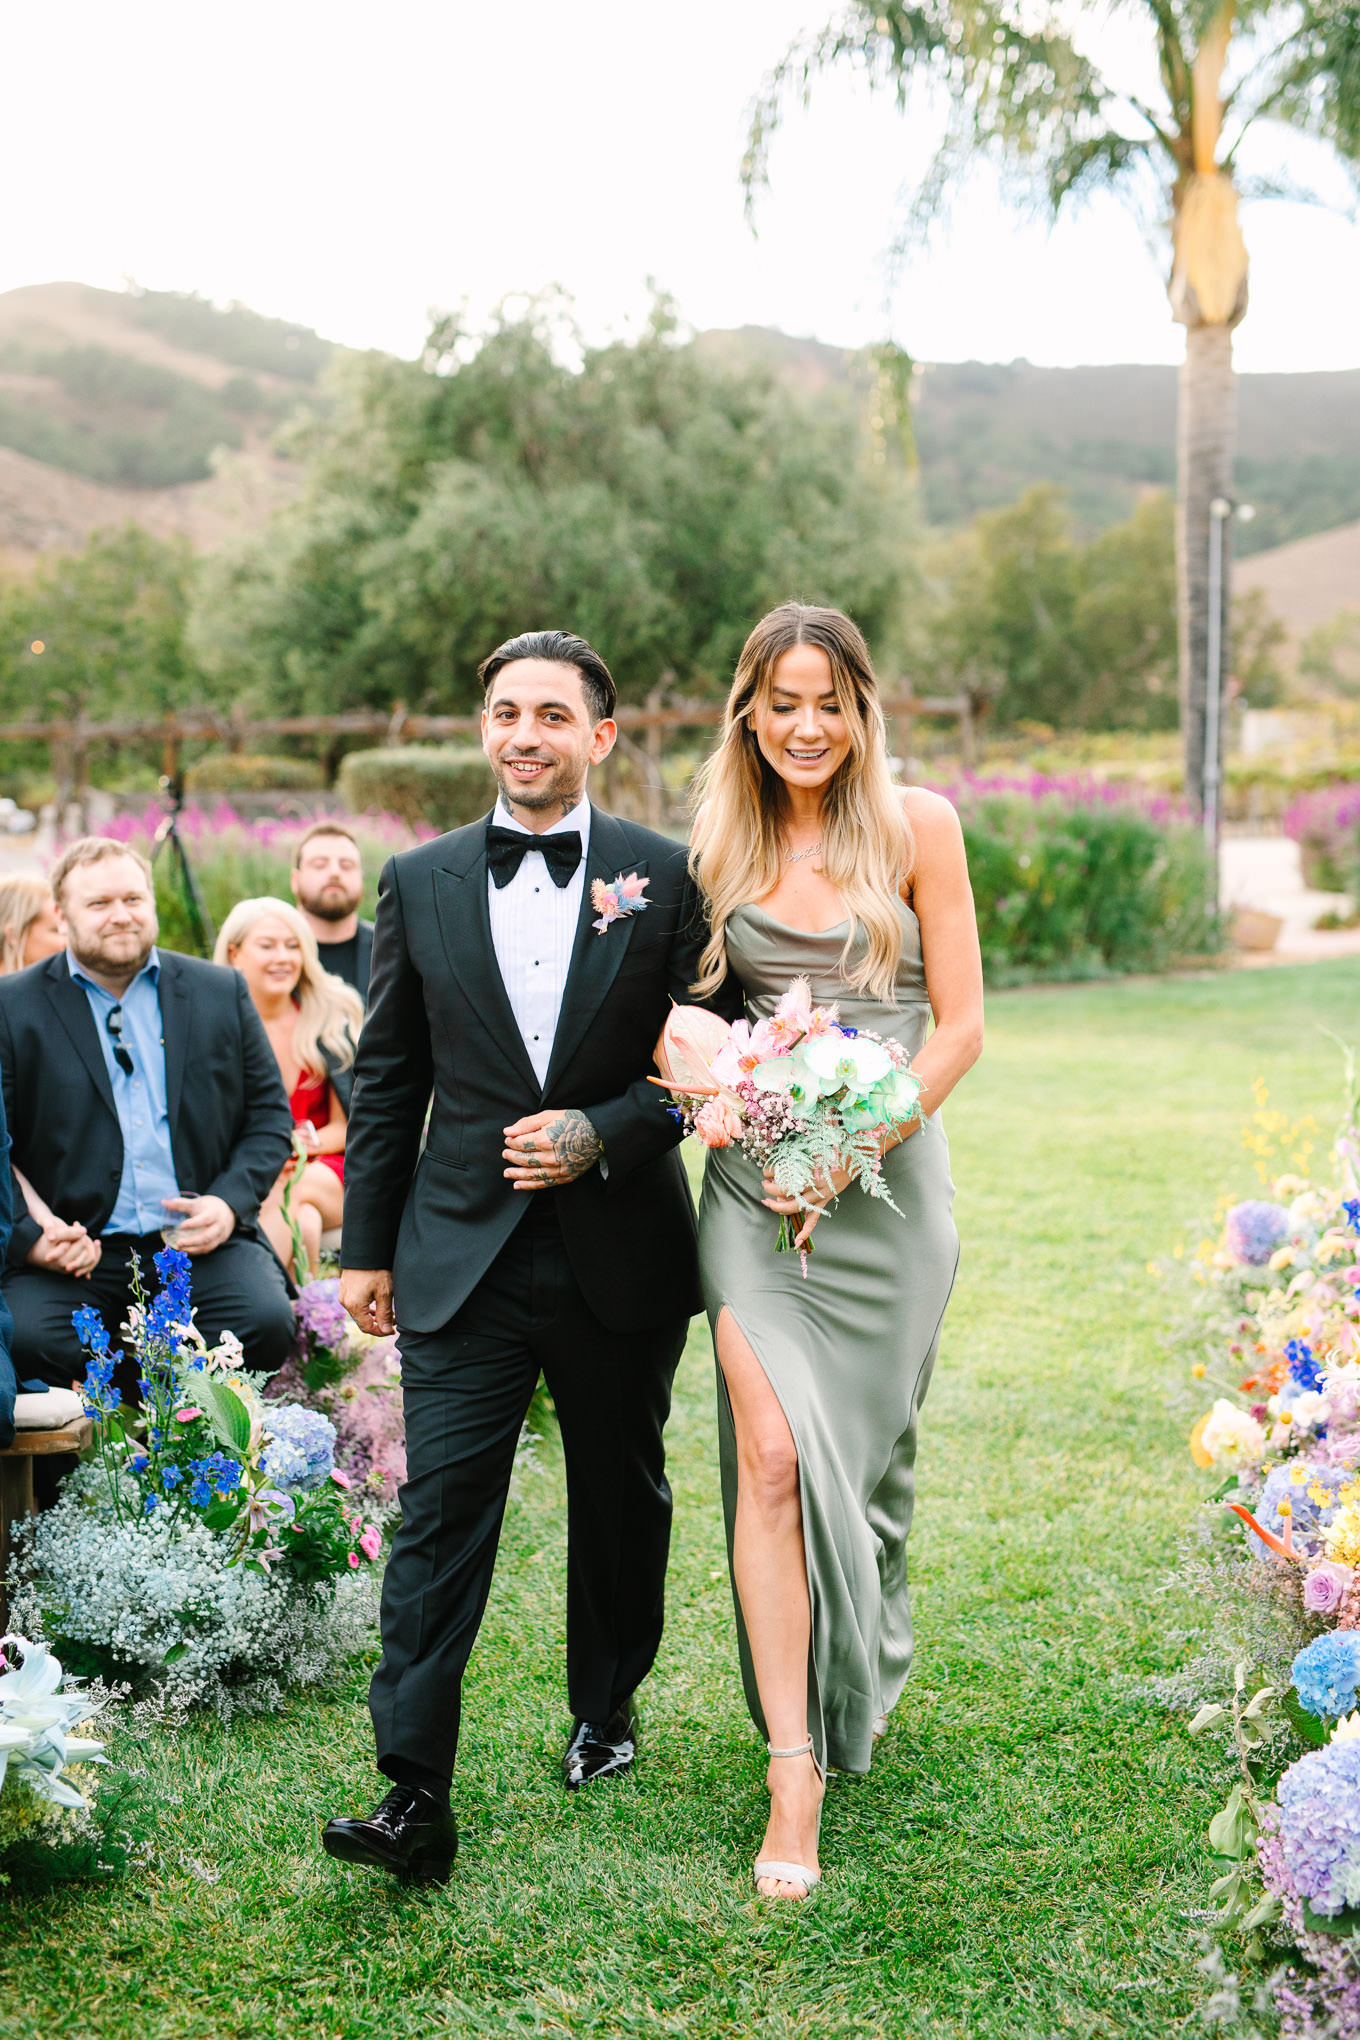 Bridesmaid and groomsman walking down the aisle | Colorful and quirky wedding at Higuera Ranch in San Luis Obispo | #sanluisobispowedding #californiawedding #higueraranch #madonnainn   
Source: Mary Costa Photography | Los Angeles